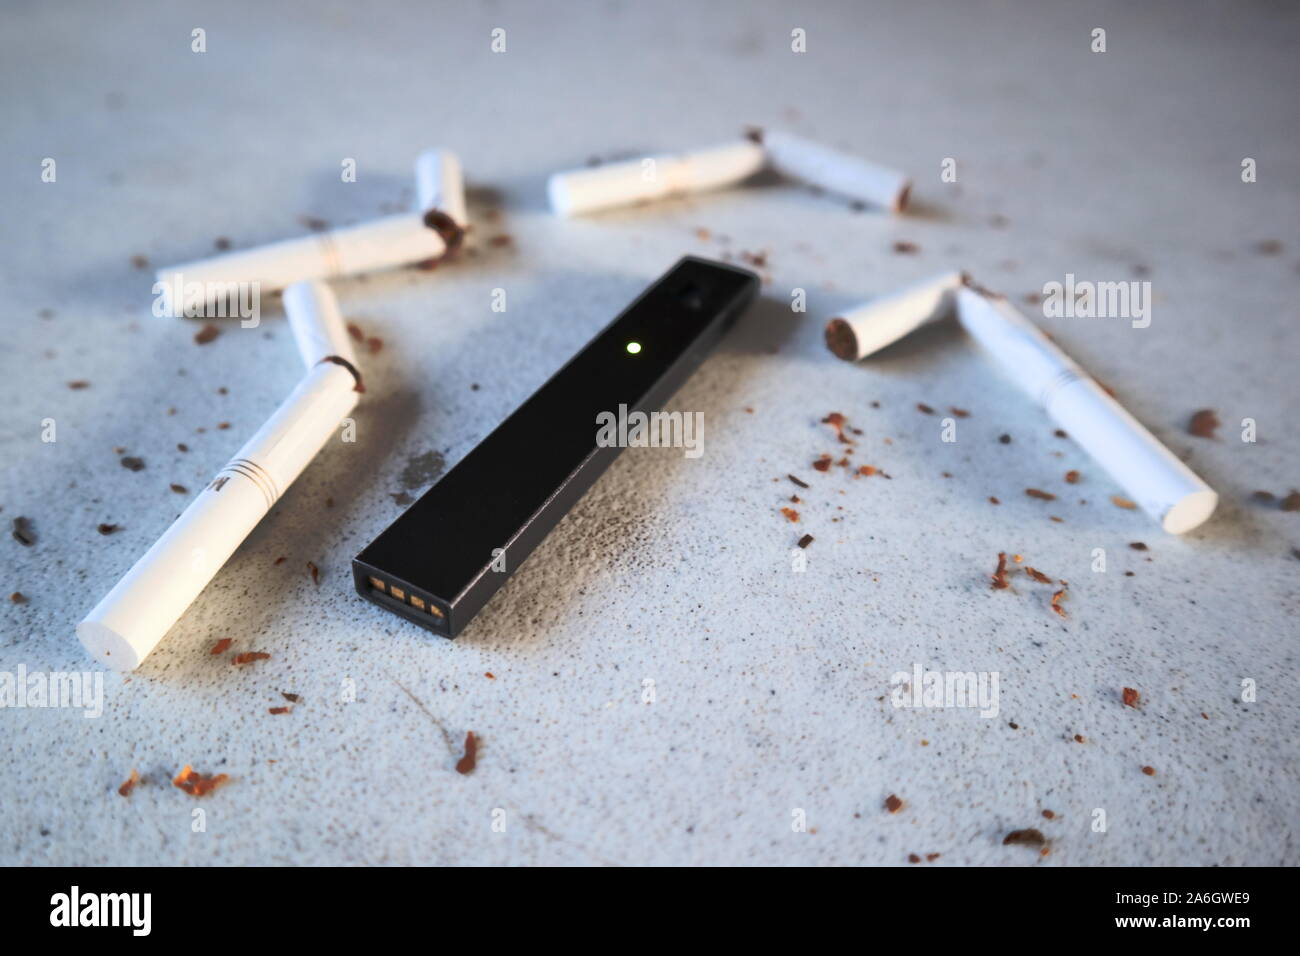 Vape device electronic cigarette juul, as smoking alternative with broken marlboro gold cigarettes and scattered tobacco on white textured background Stock Photo